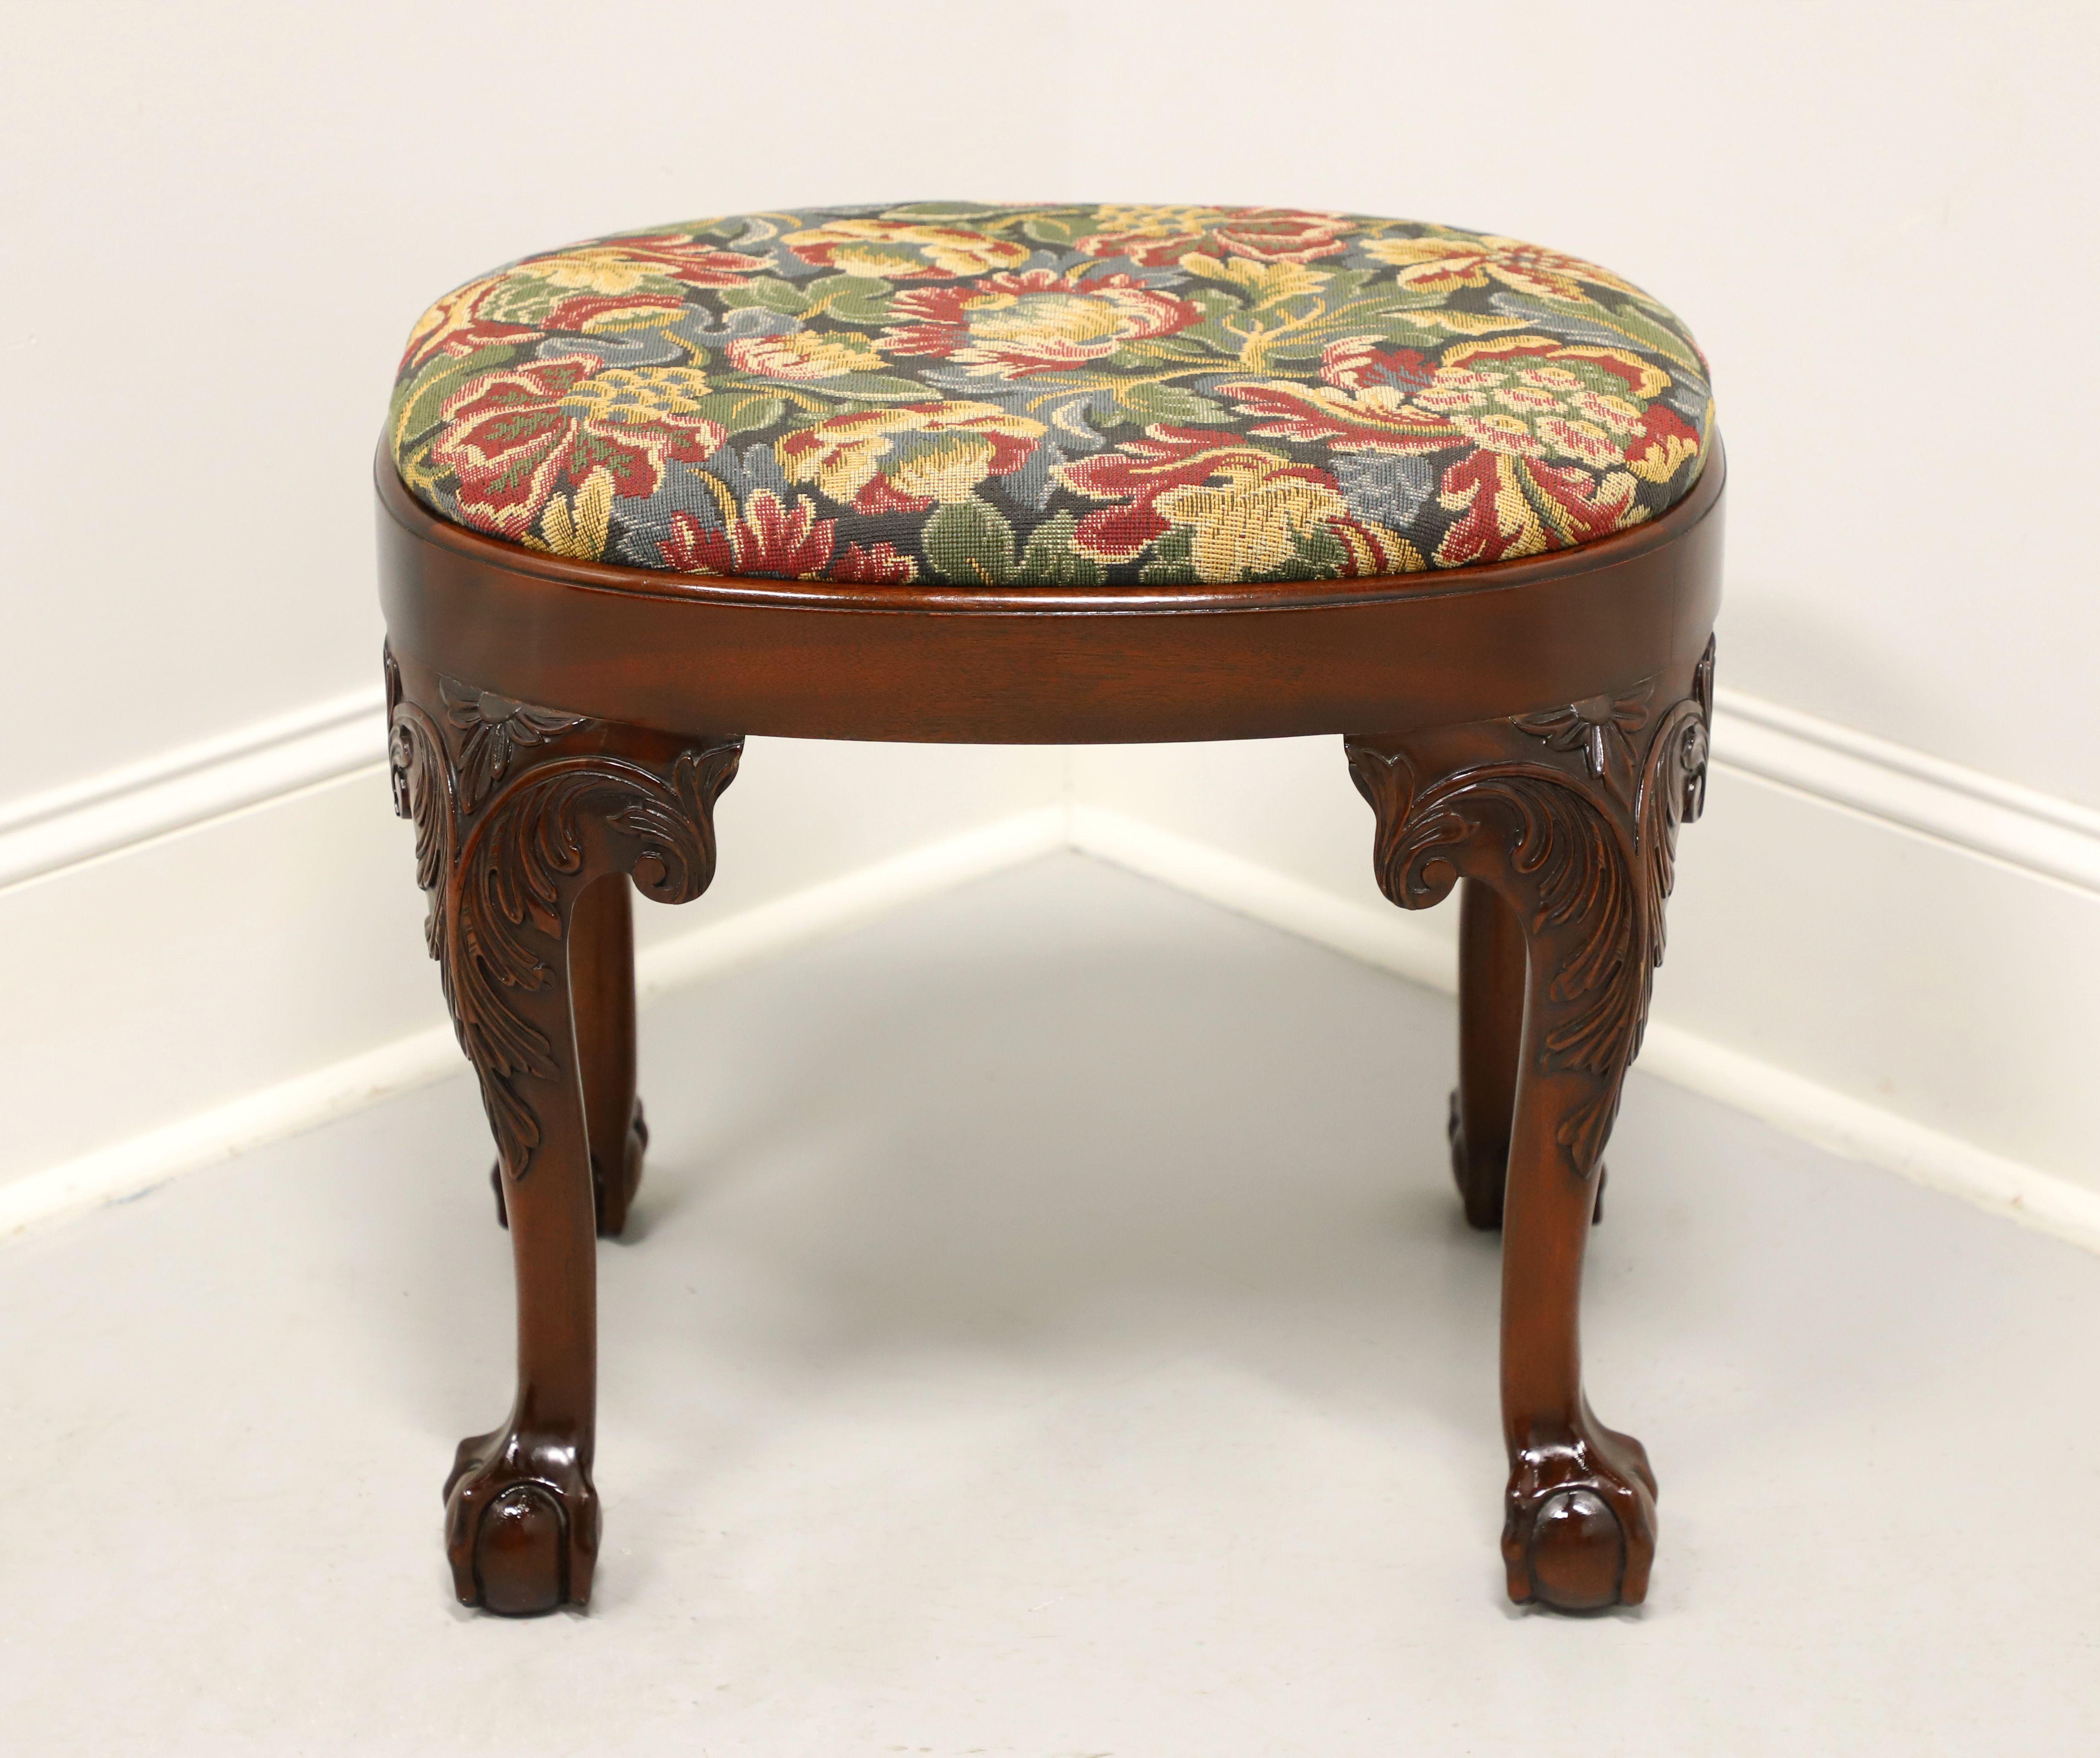 A Chippendale style bench footstool, unbranded, made for high end furniture dealer, Colony Furniture of Charlotte, North Carolina, USA, under their private label. Likely made for them by Century Furniture. Solid mahogany, oval shape, a multi-color